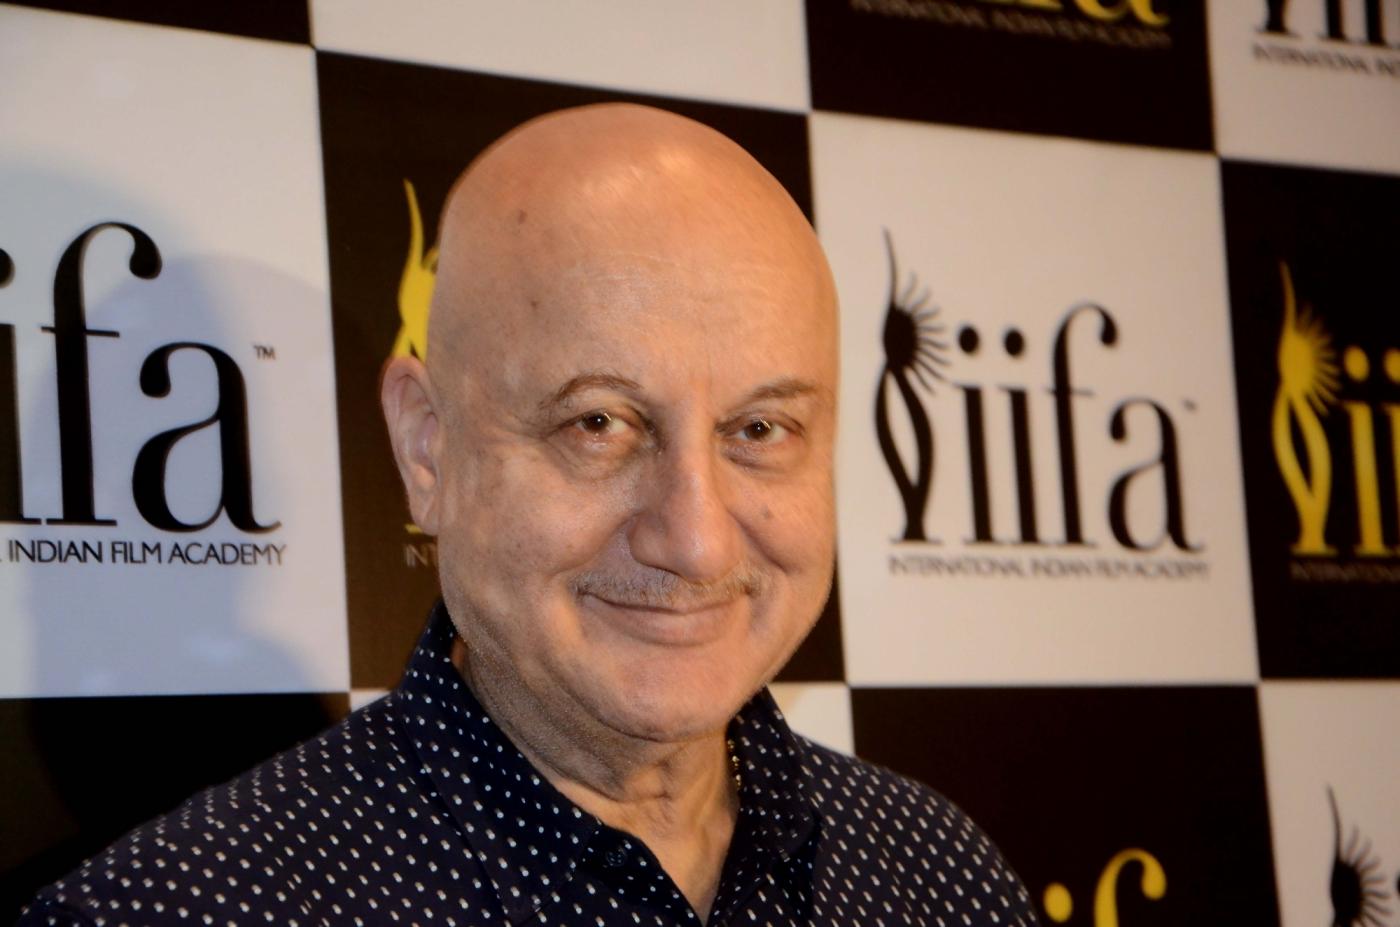 Mumbai: Actor Anupam Kher at International Indian Film Academy (IIFA) awards Voting Weekend organised by the academy, in Mumbai on April 29, 2018. (Photo: IANS) by .